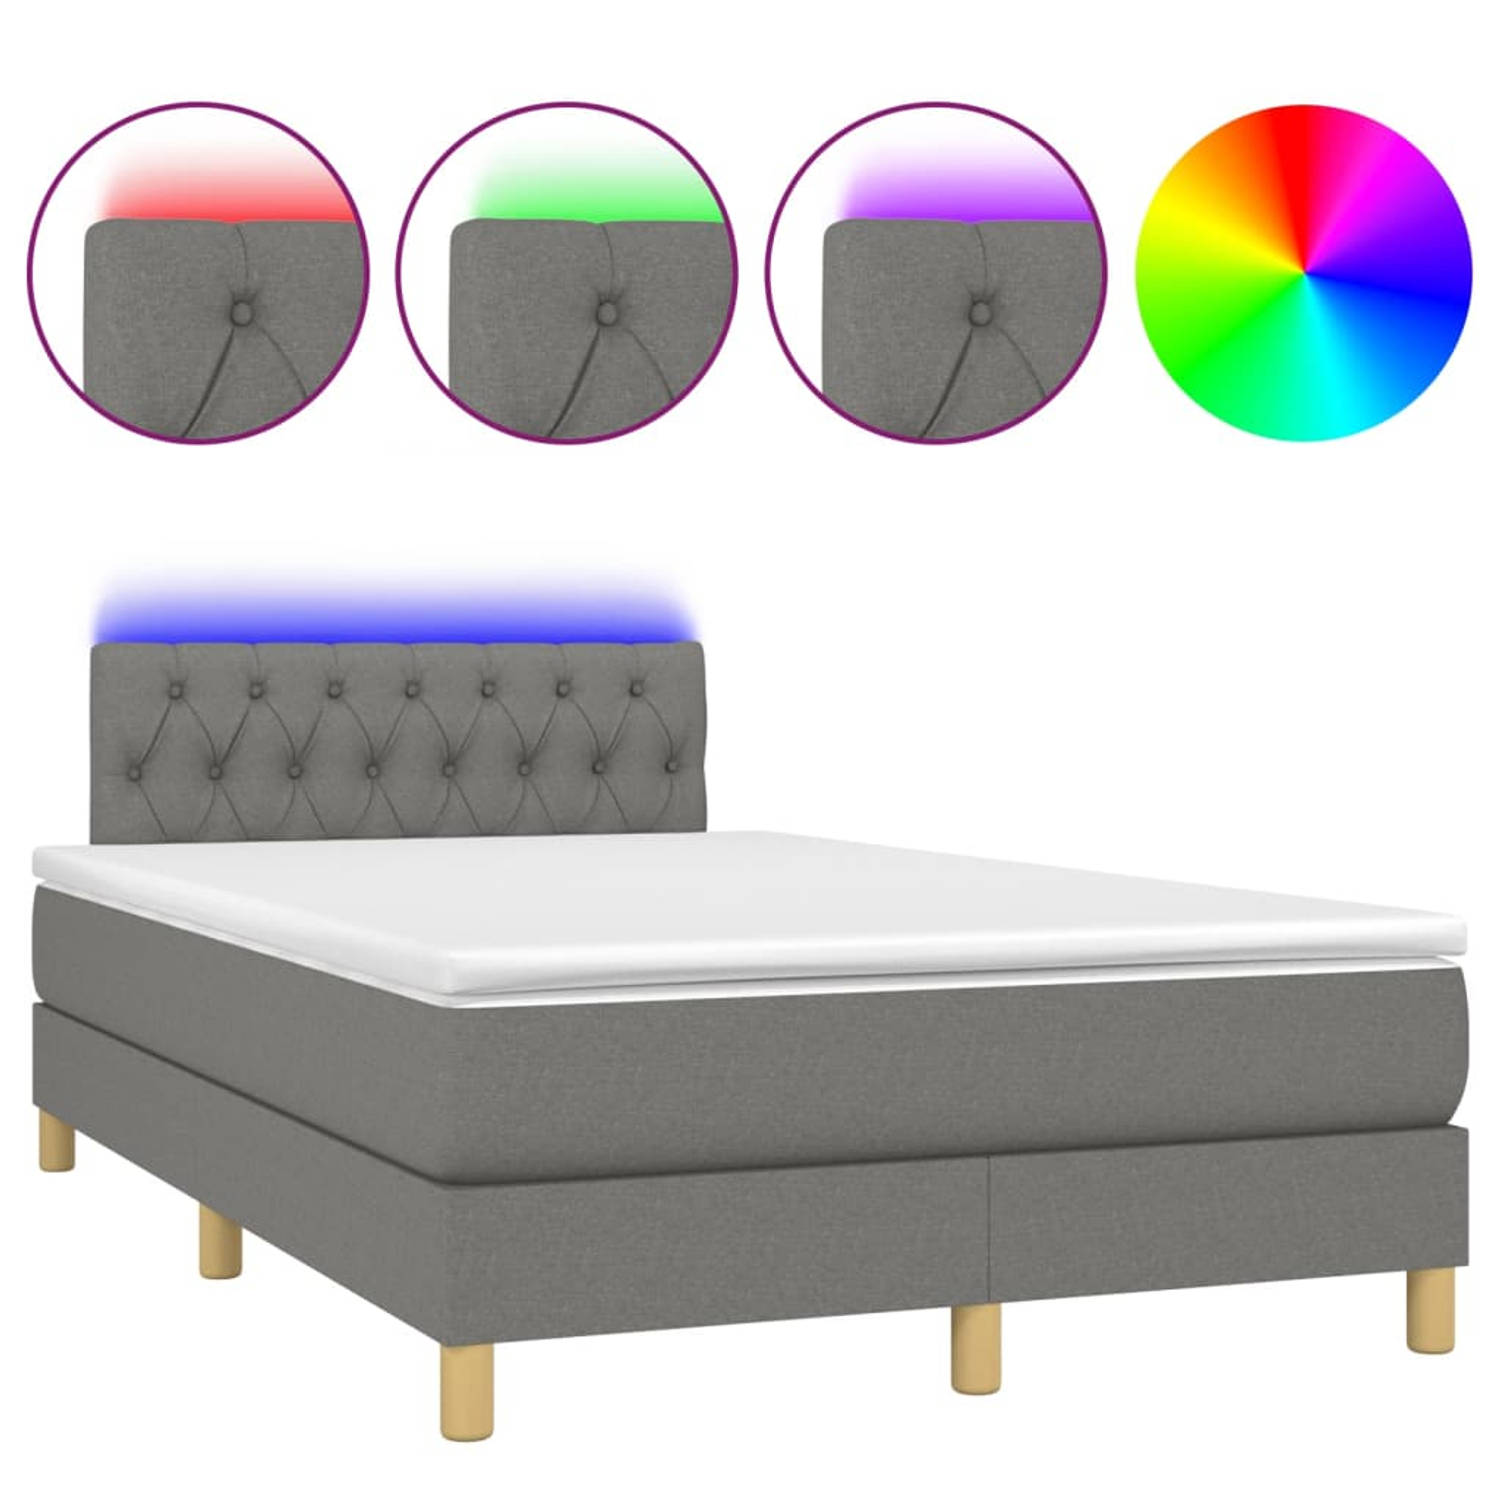 The Living Store Boxspring met matras en LED stof donkergrijs 120x200 cm - Boxspring - Boxsprings - Bed - Slaapmeubel - Boxspringbed - Boxspring Bed - Tweepersoonsbed - Bed Met Mat